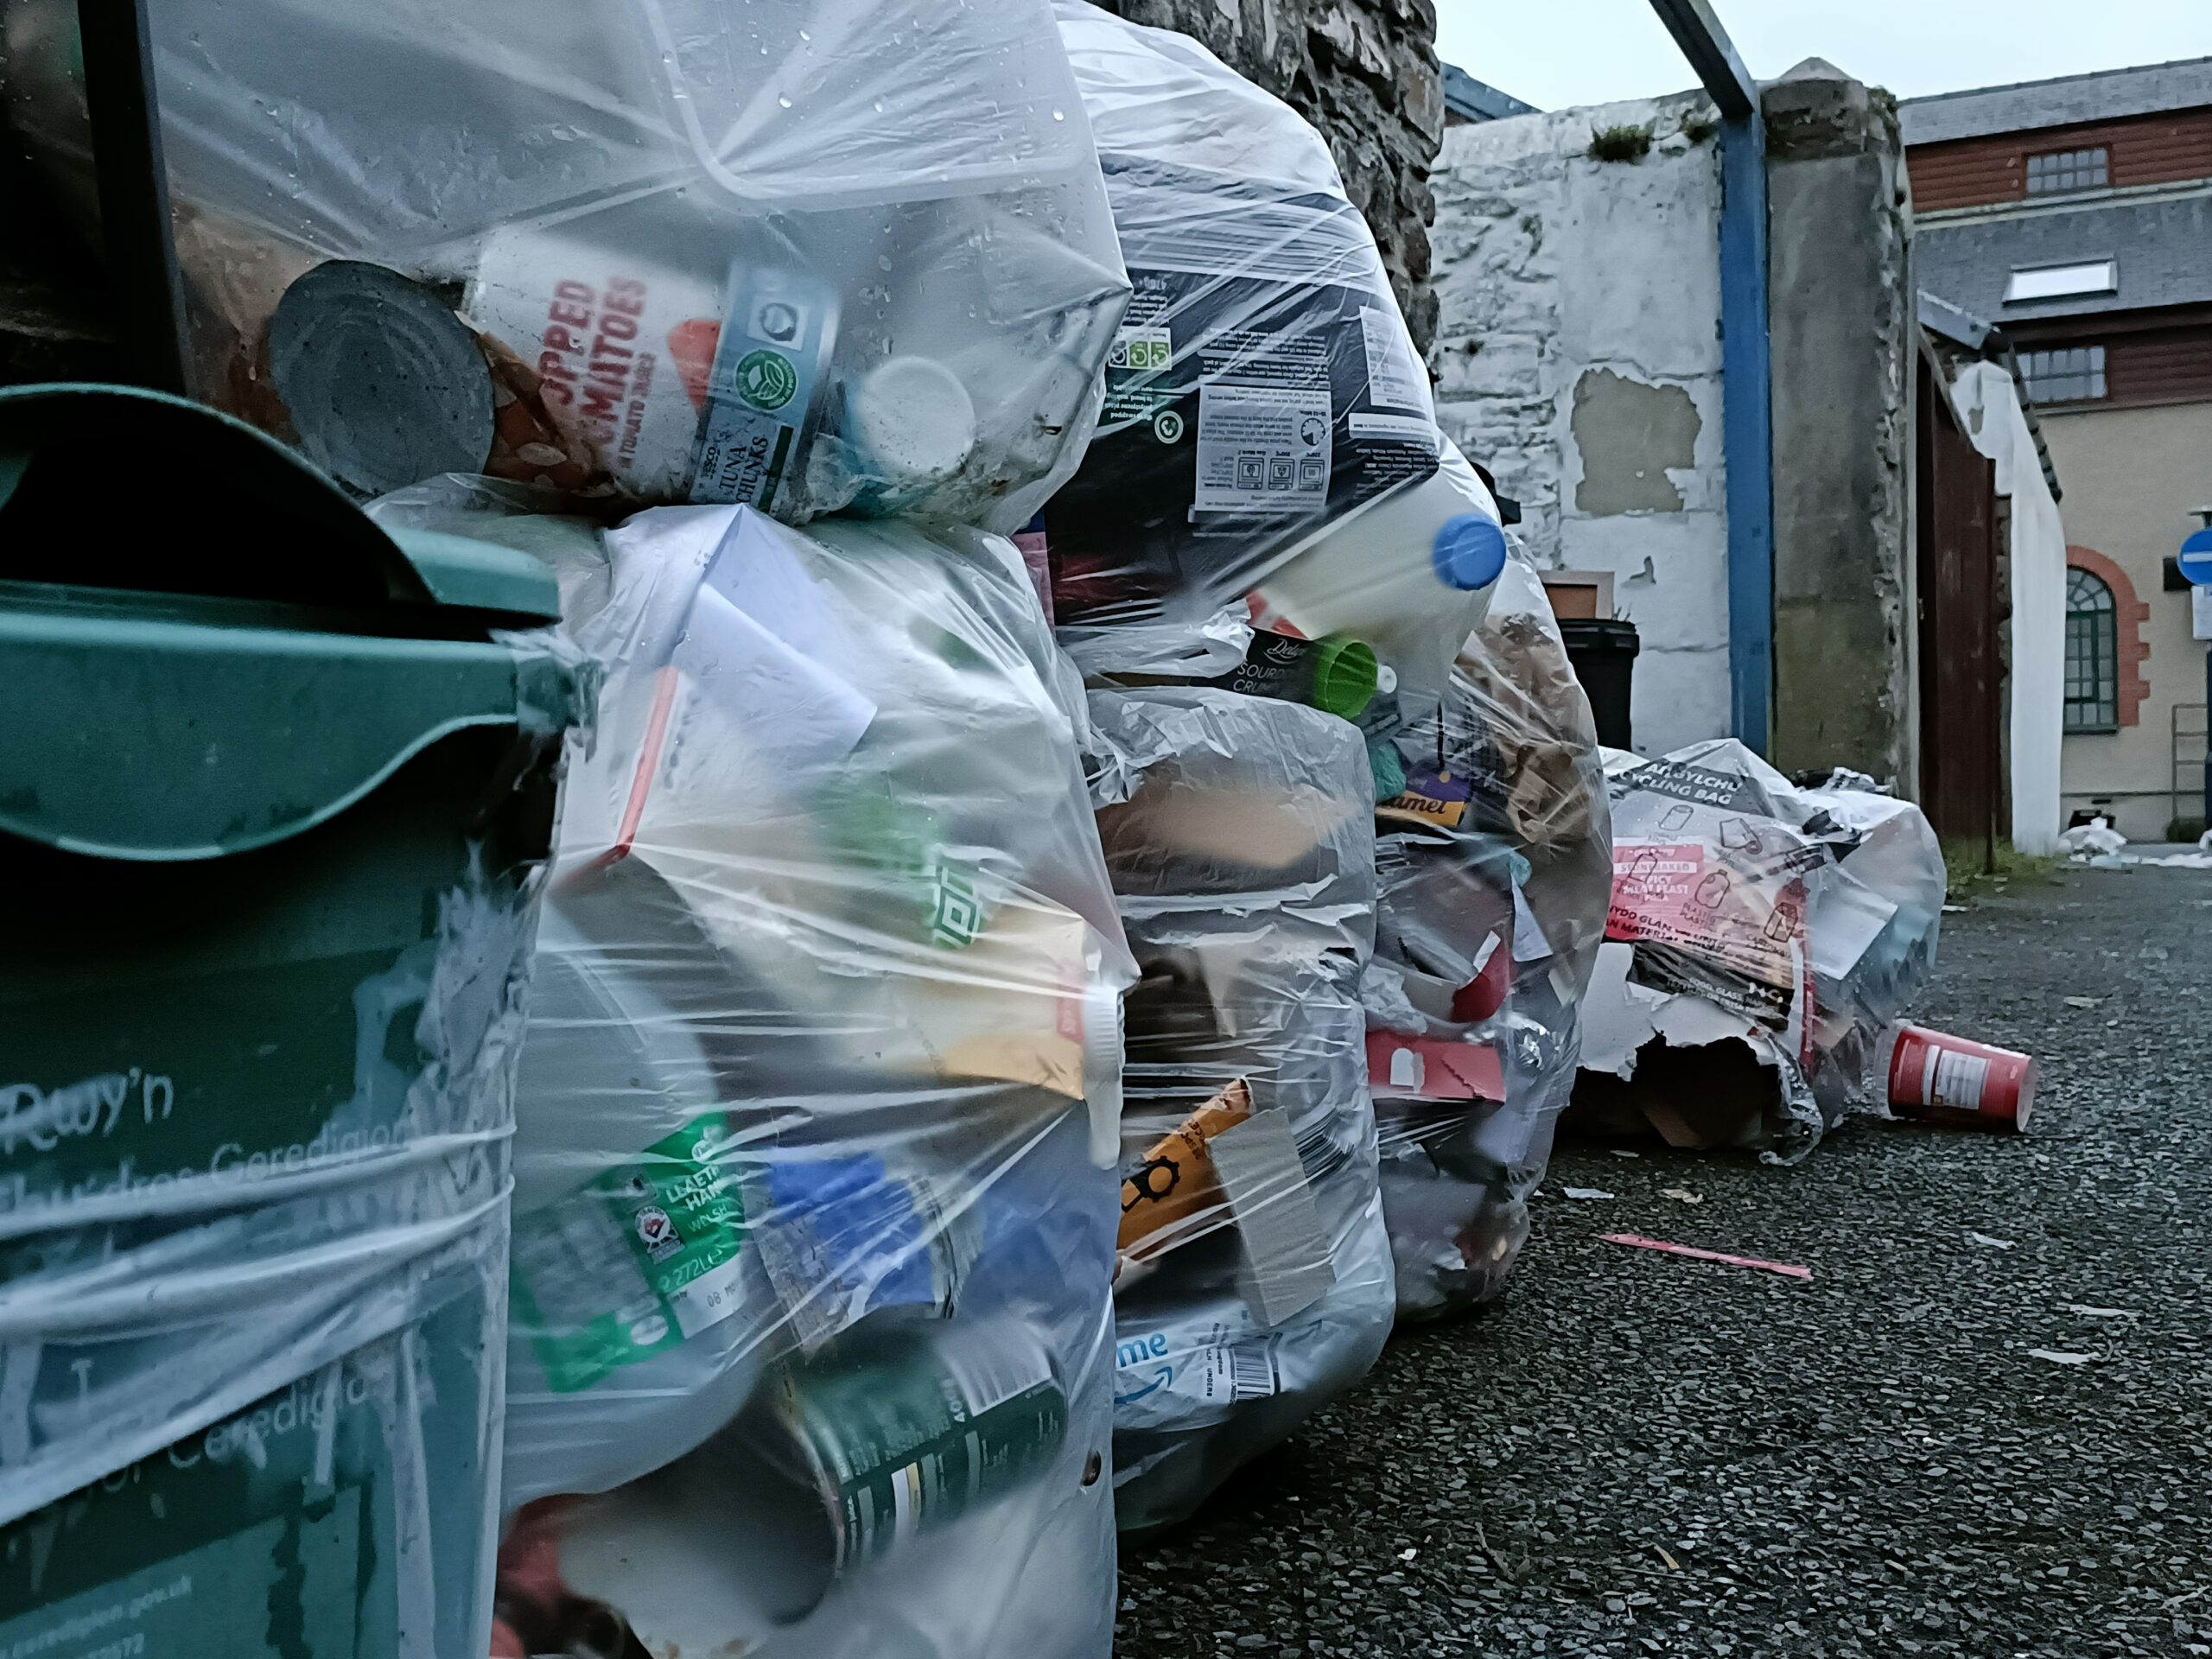 Arrangements made for Christmas and New Year waste collections in Ceredigion